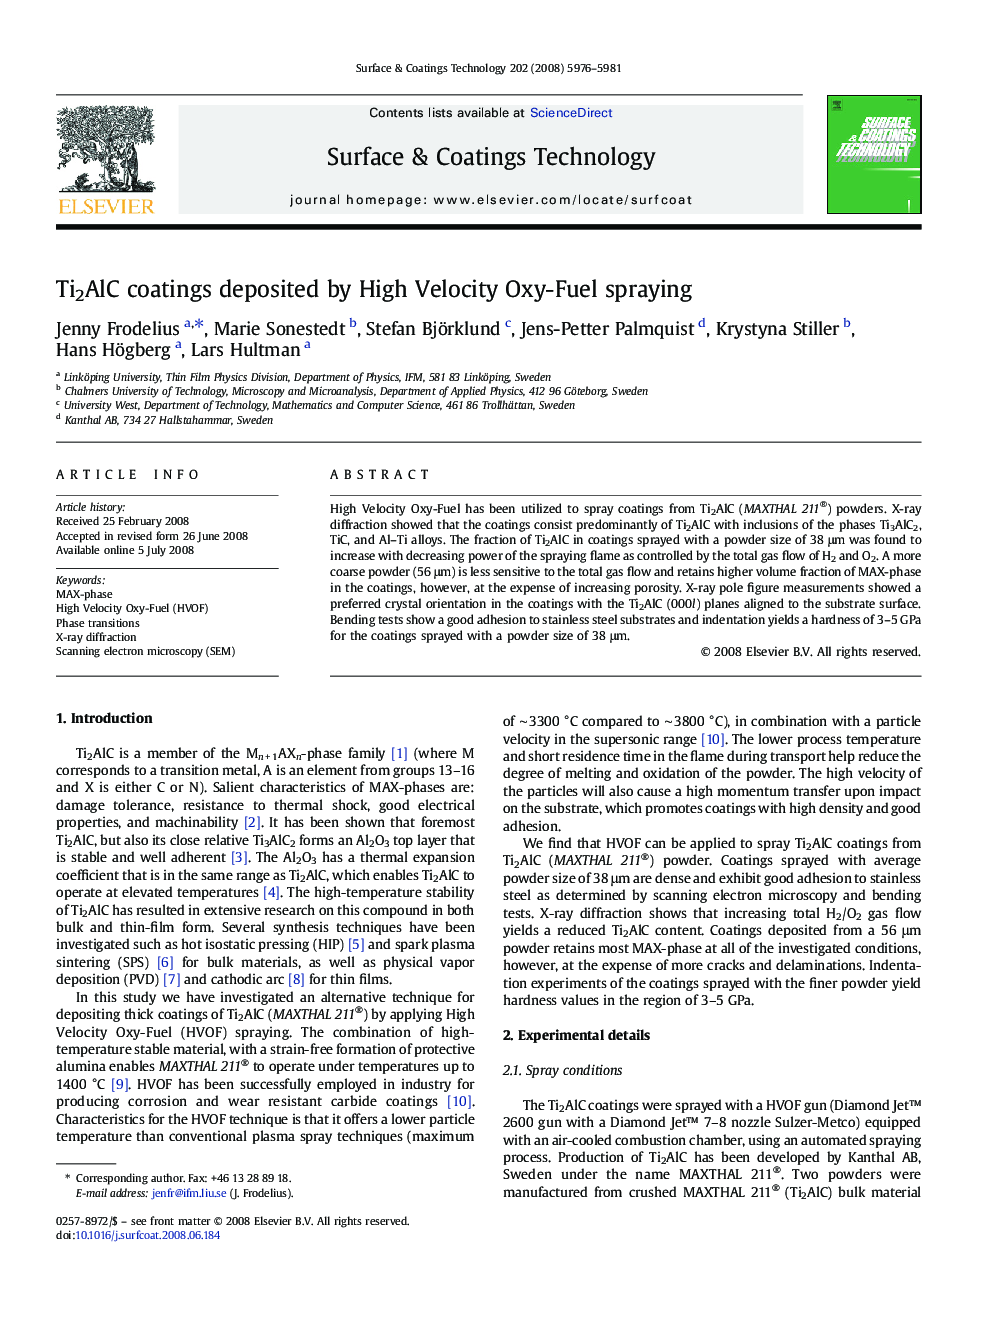 Ti2AlC coatings deposited by High Velocity Oxy-Fuel spraying